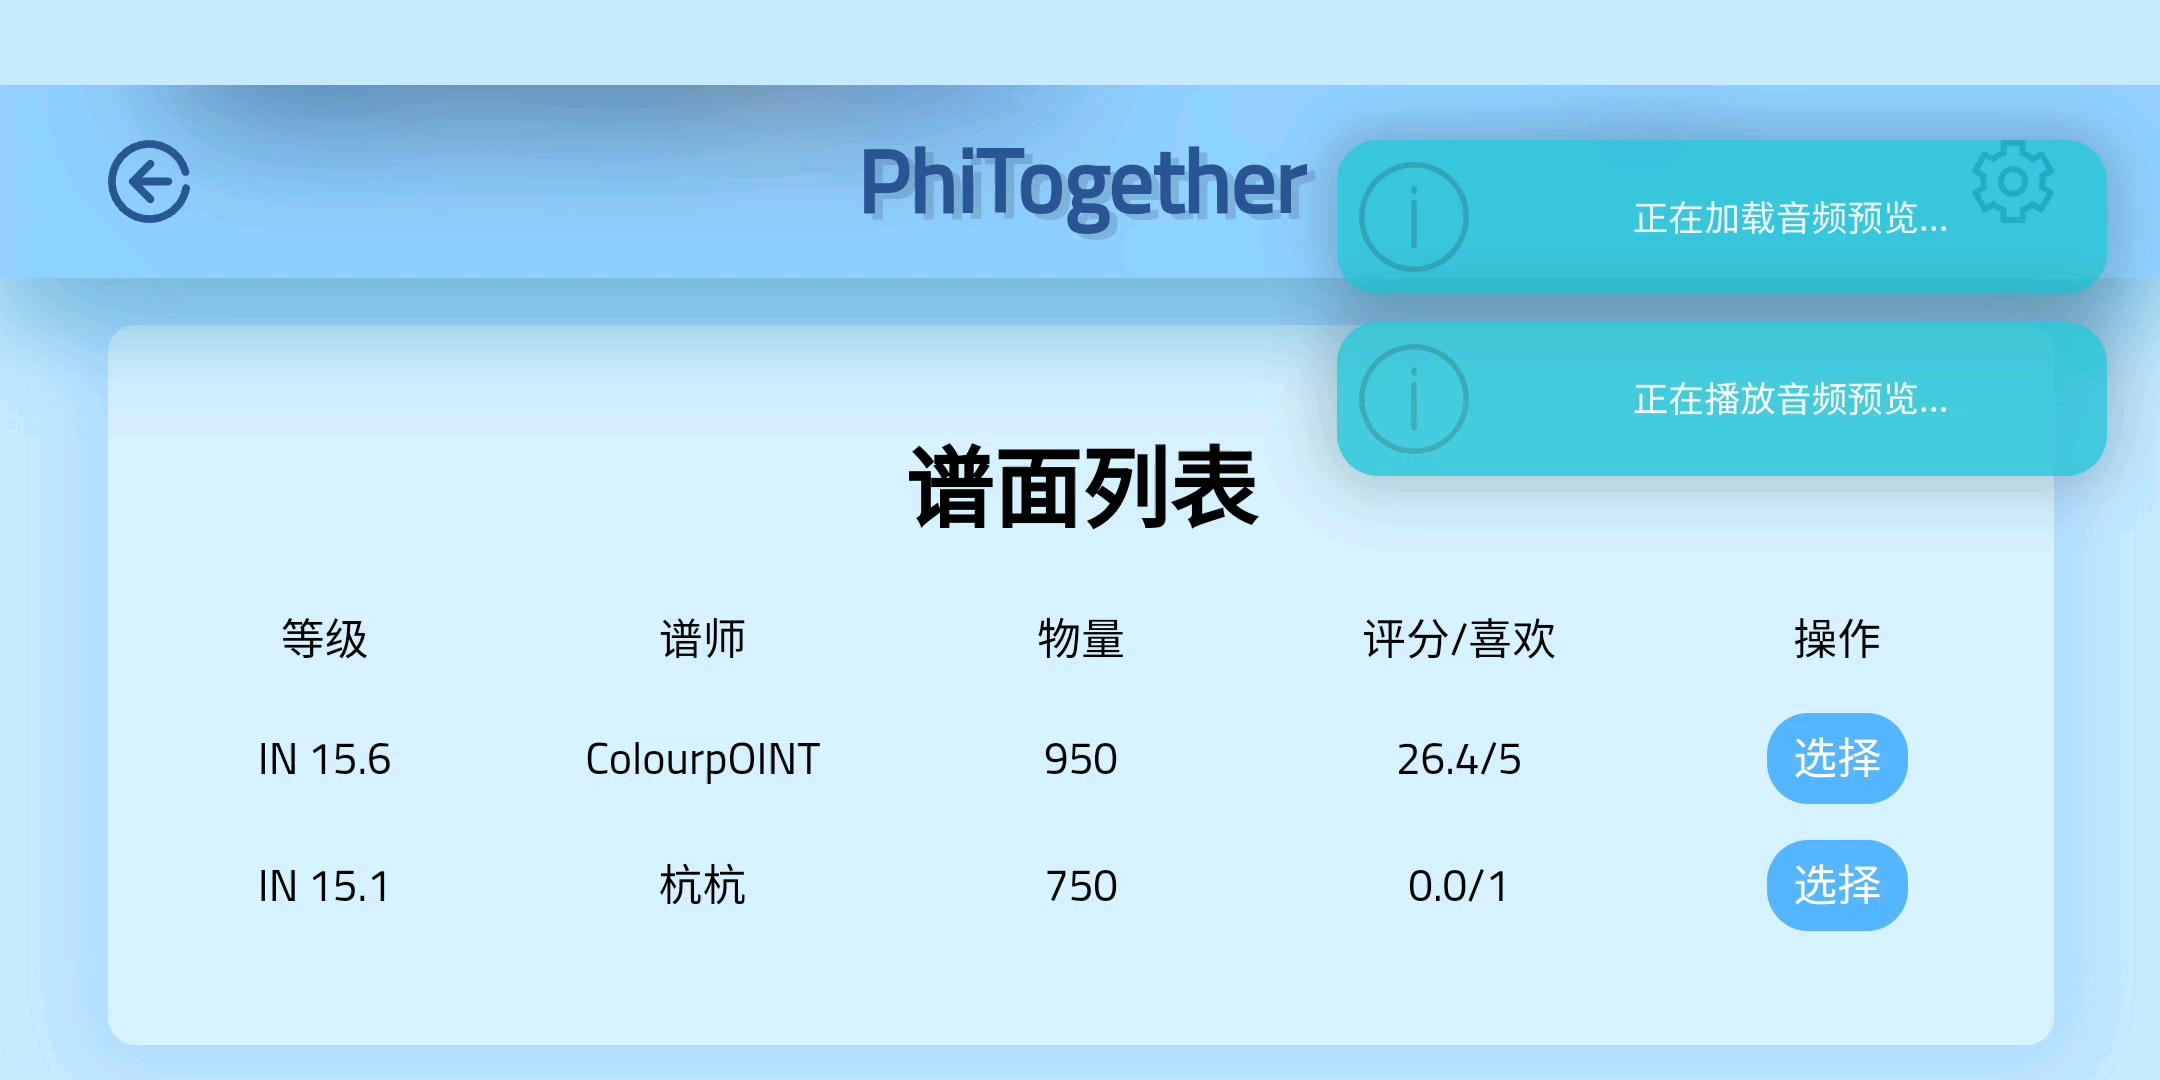 PhiTogether